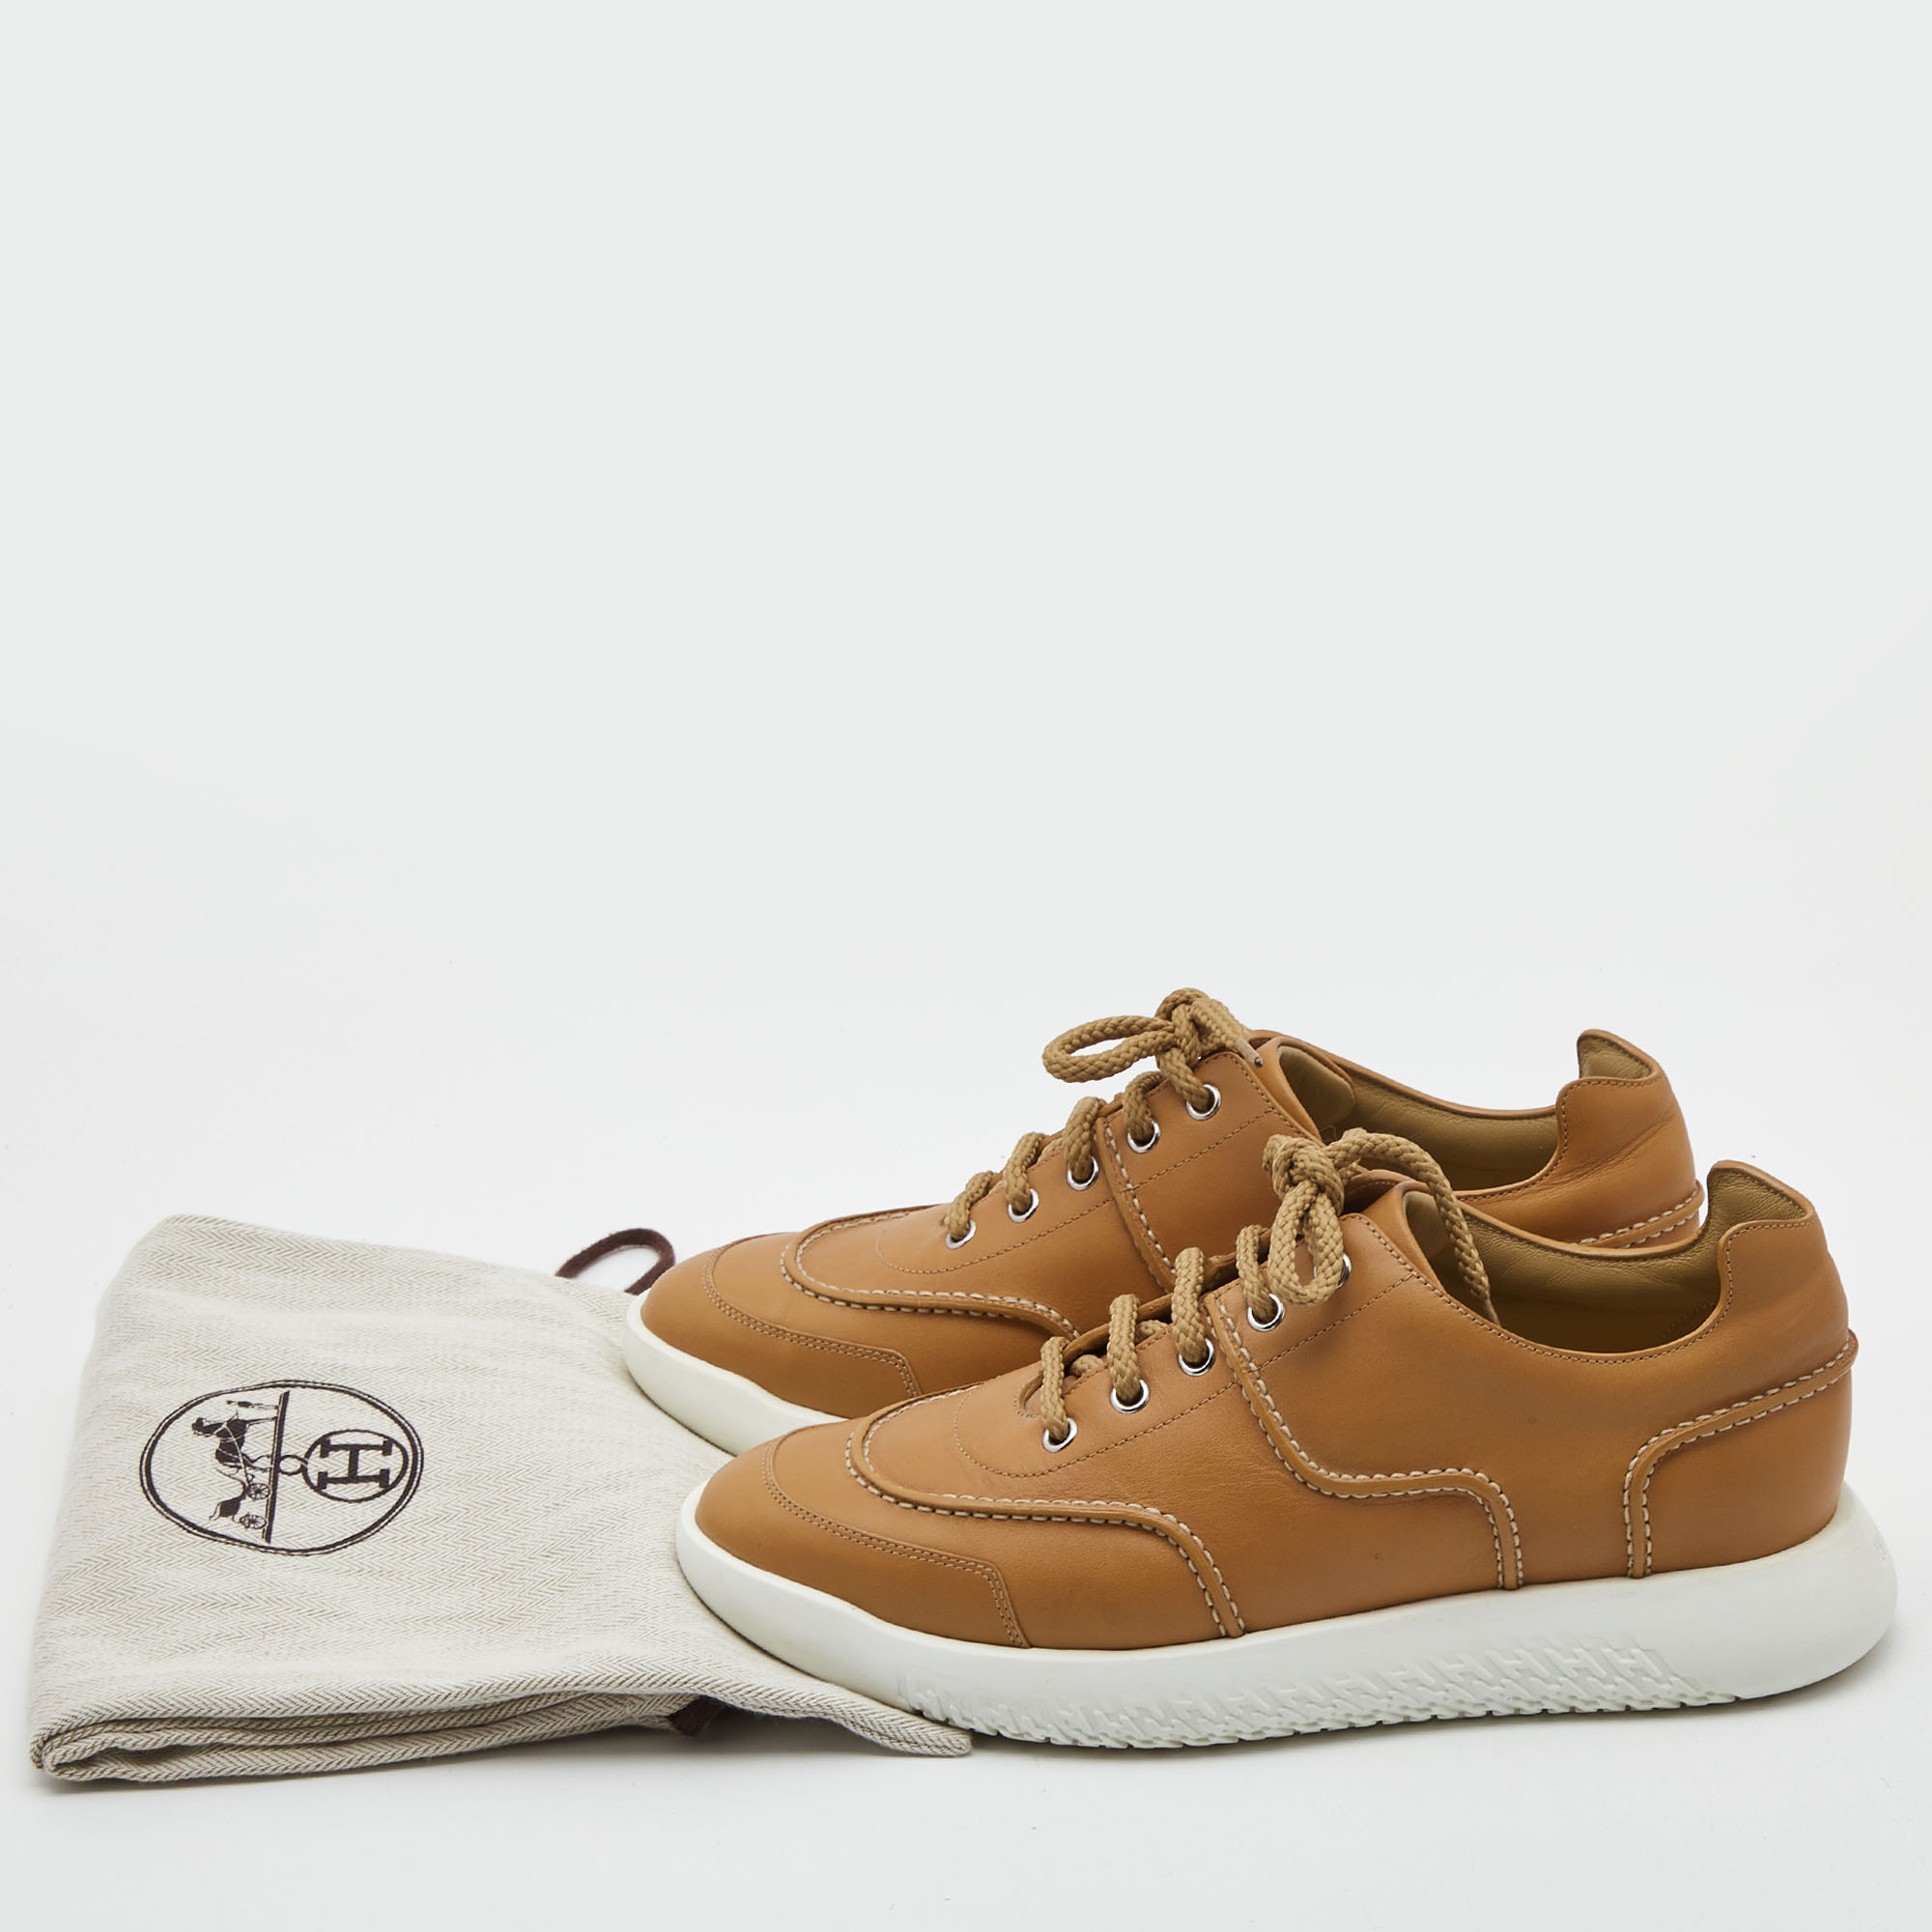 Hermes Tan Leather Low Top Sneakers Size 40